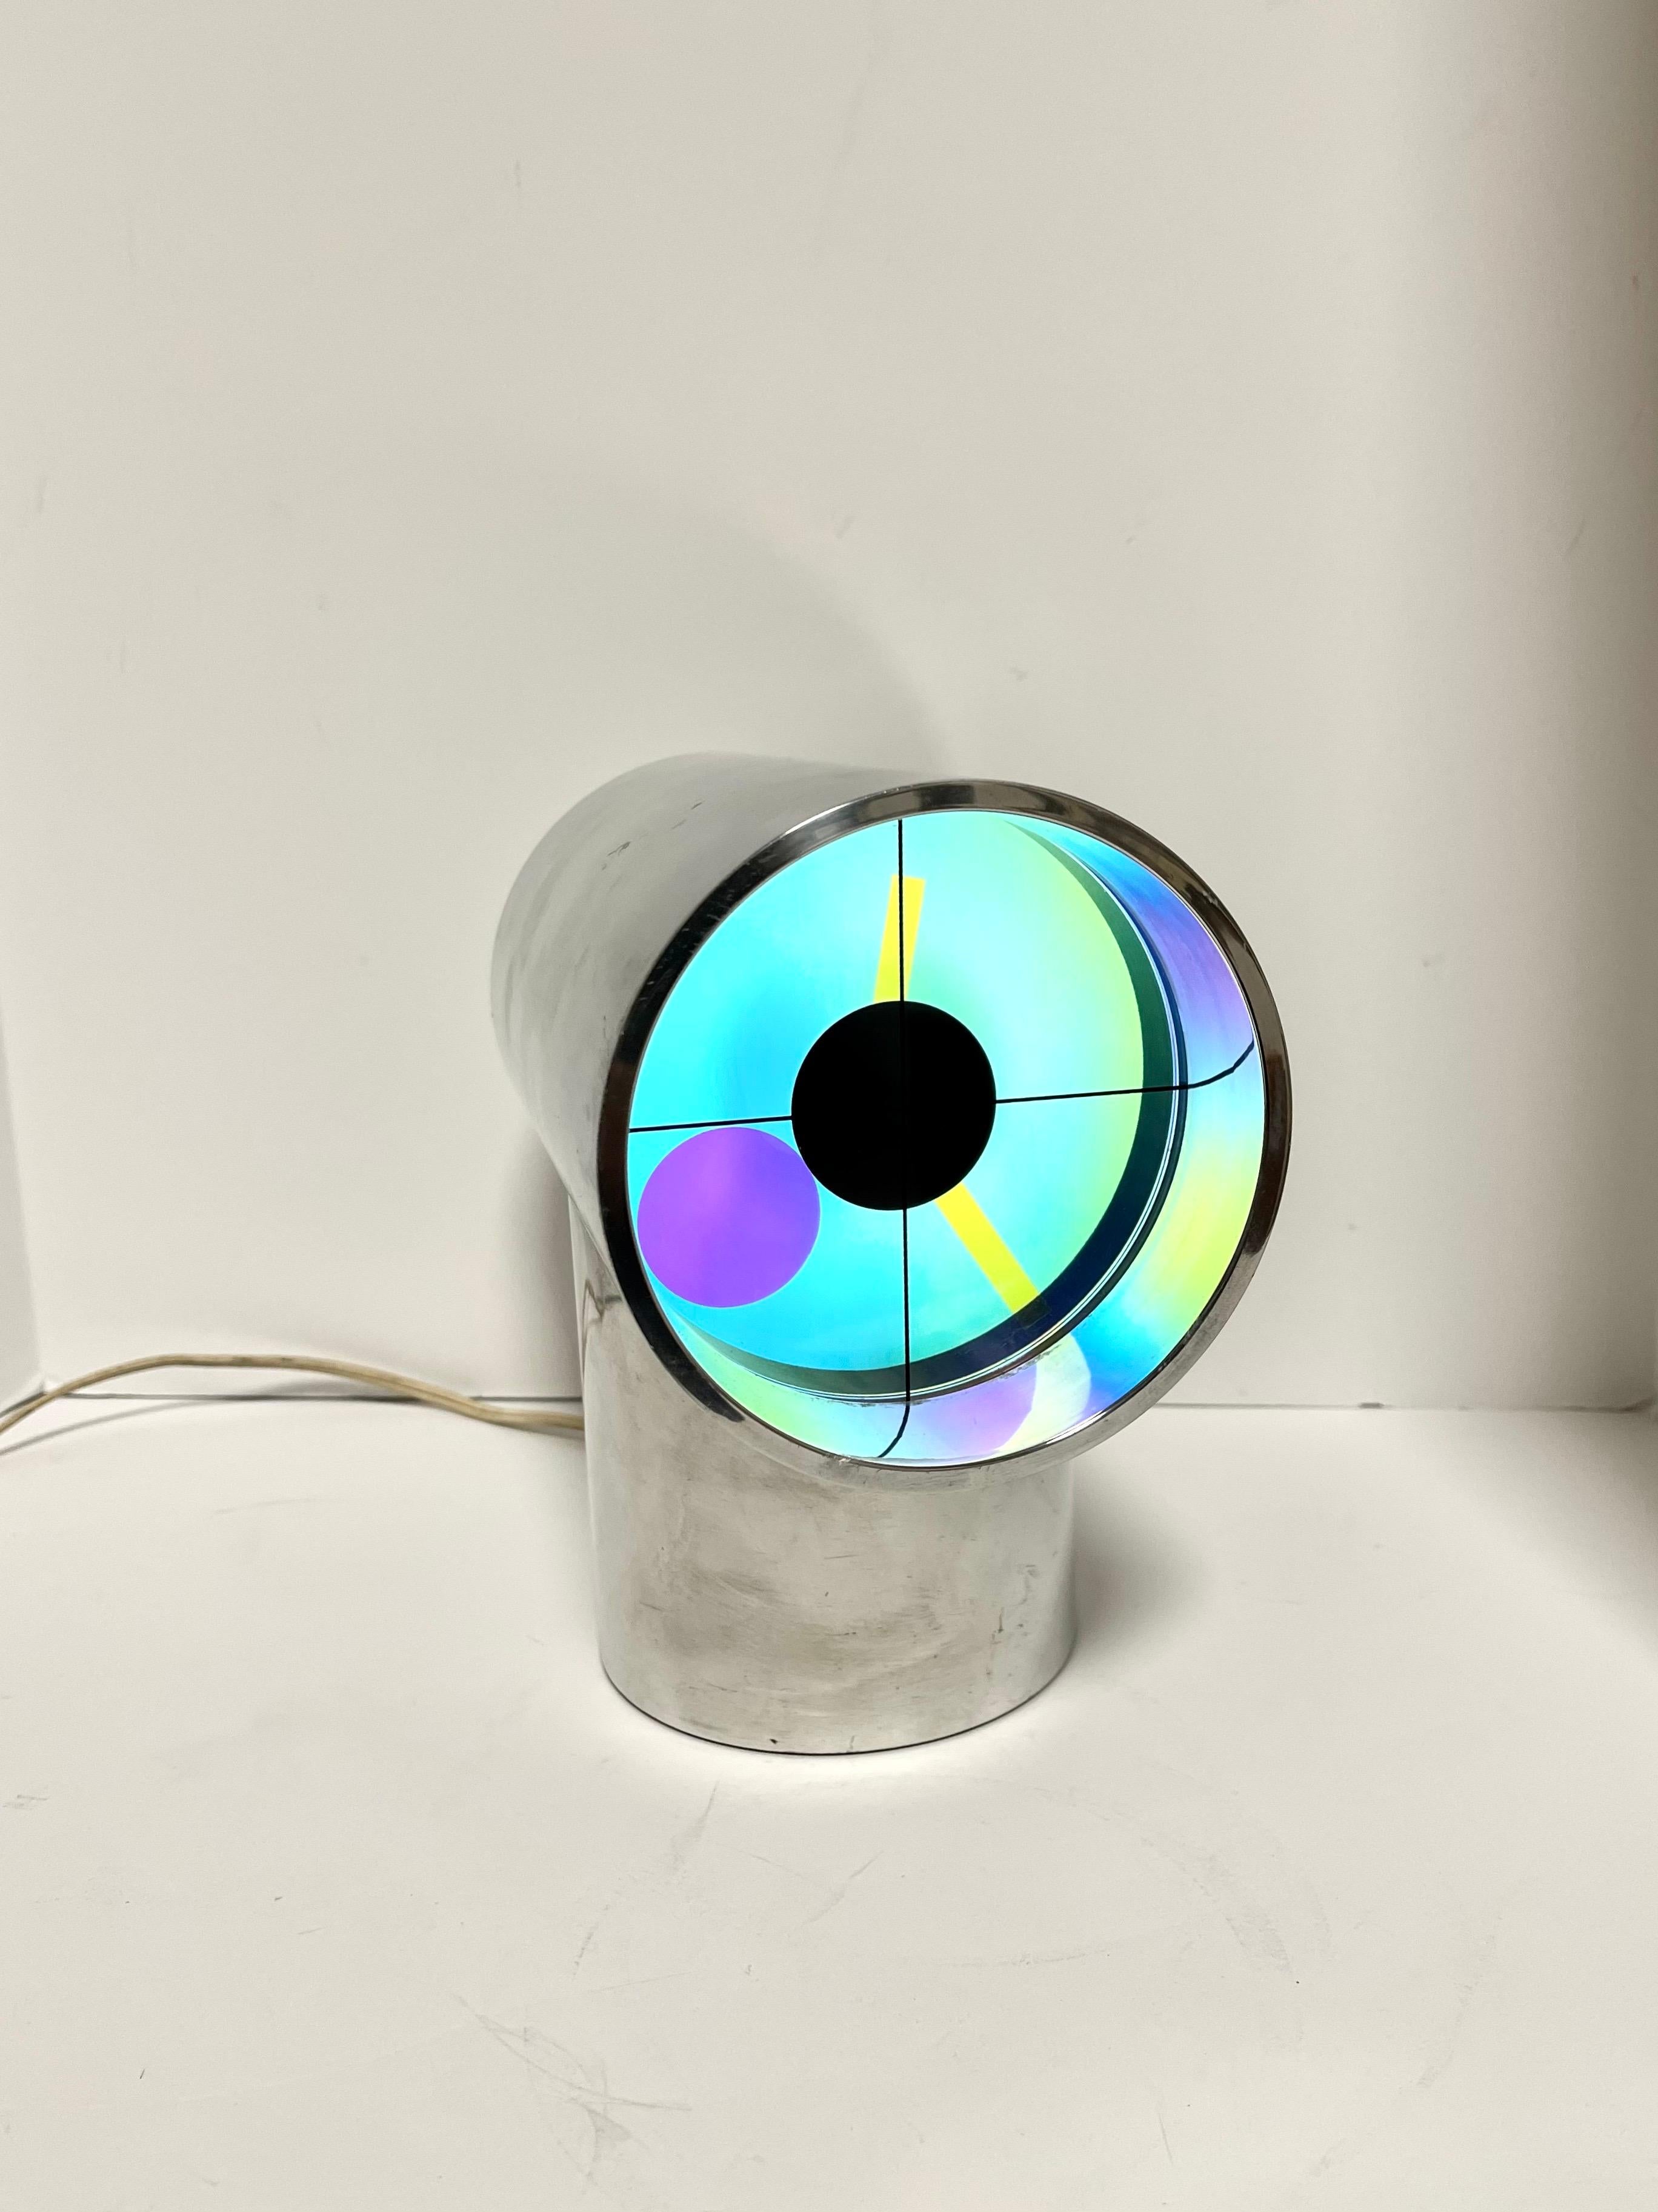 A vintage early 1970's aluminum Aurora clock by Kirsch/Hamilton of Cambridge, Mass. It is in great working condition, please see the attached video! This is an early version in an aluminum case. We have replaced the #93 bulb with an LED light to